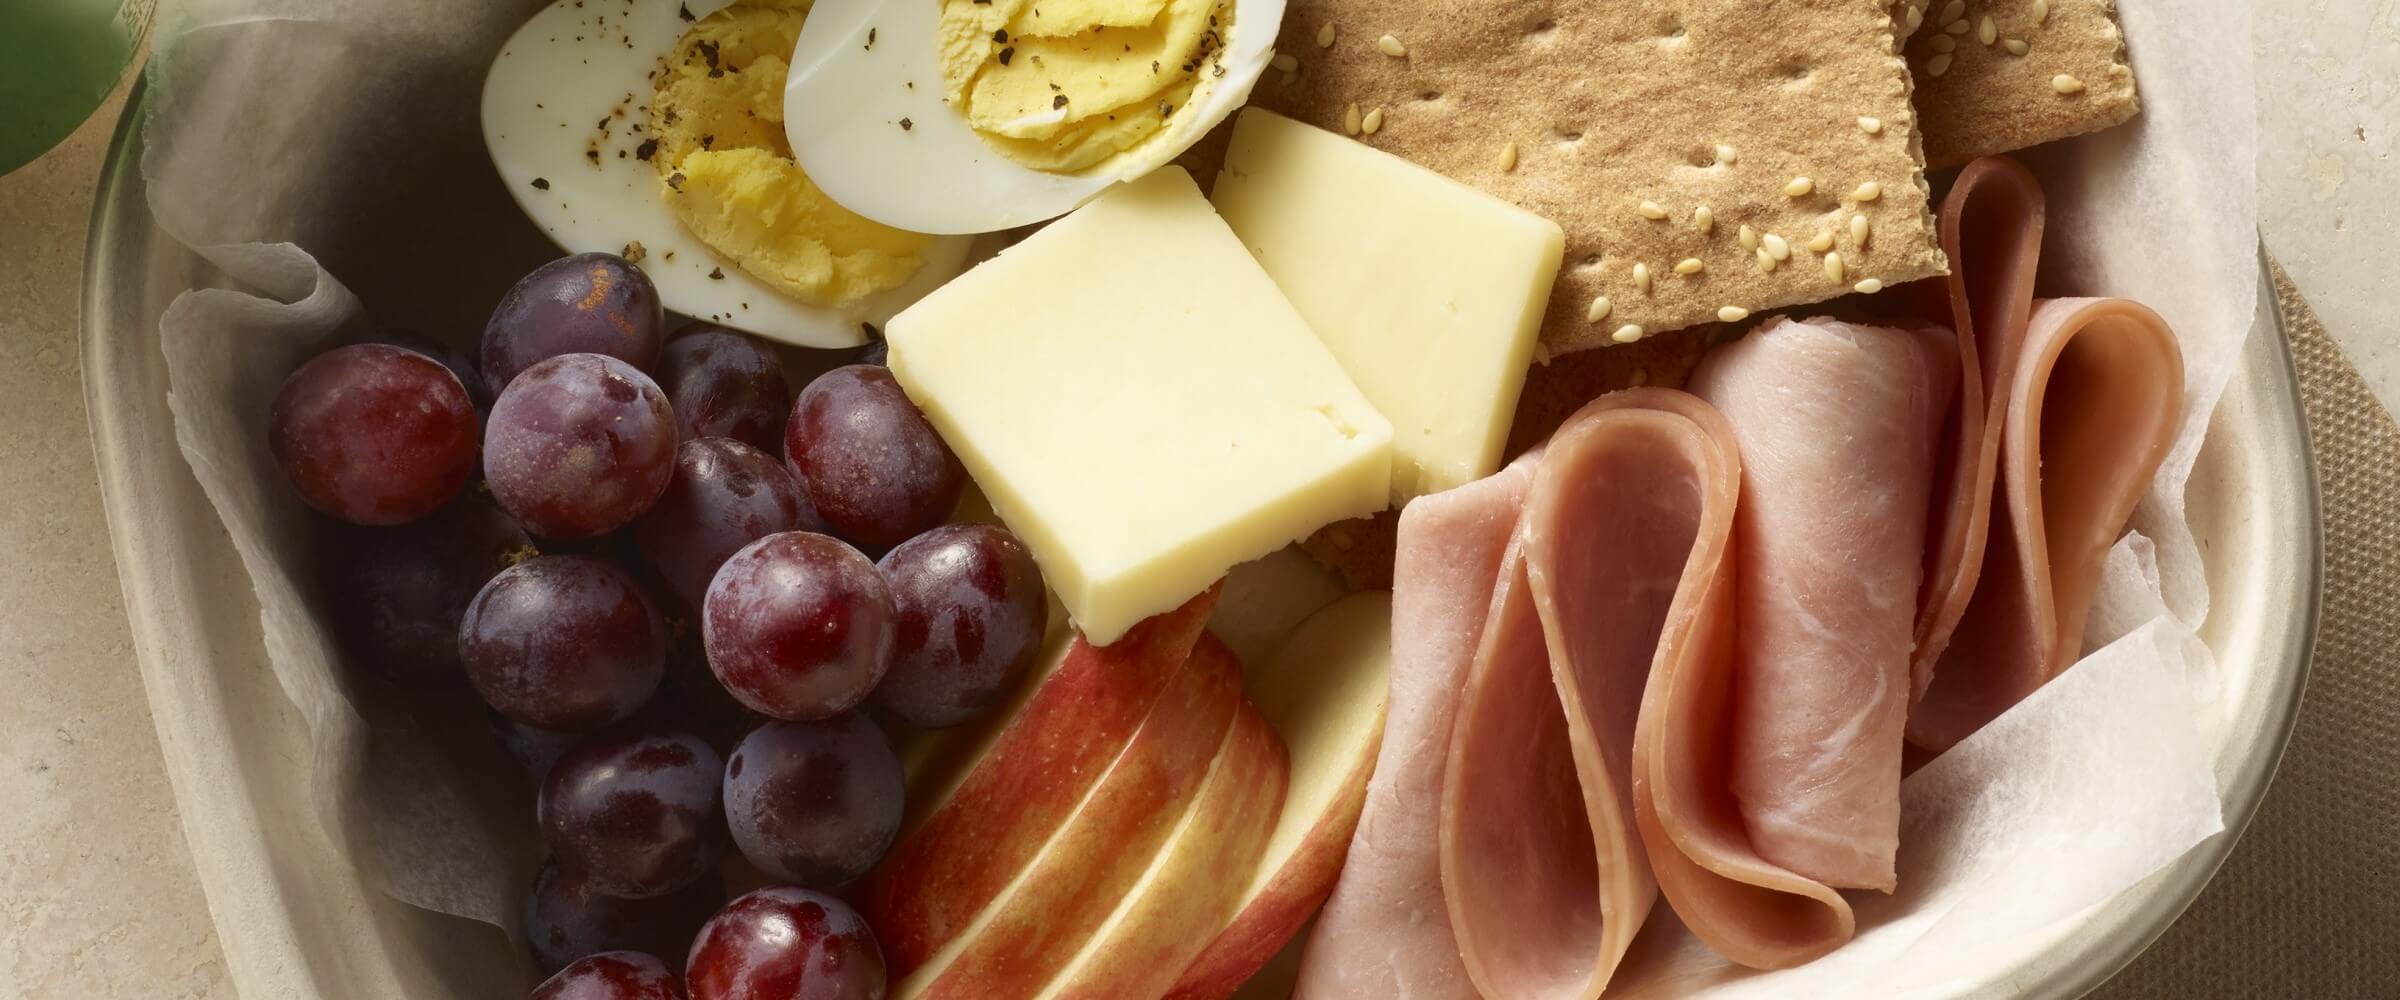 protein box with meat, cheese, eggs, crackers, grapes and apples